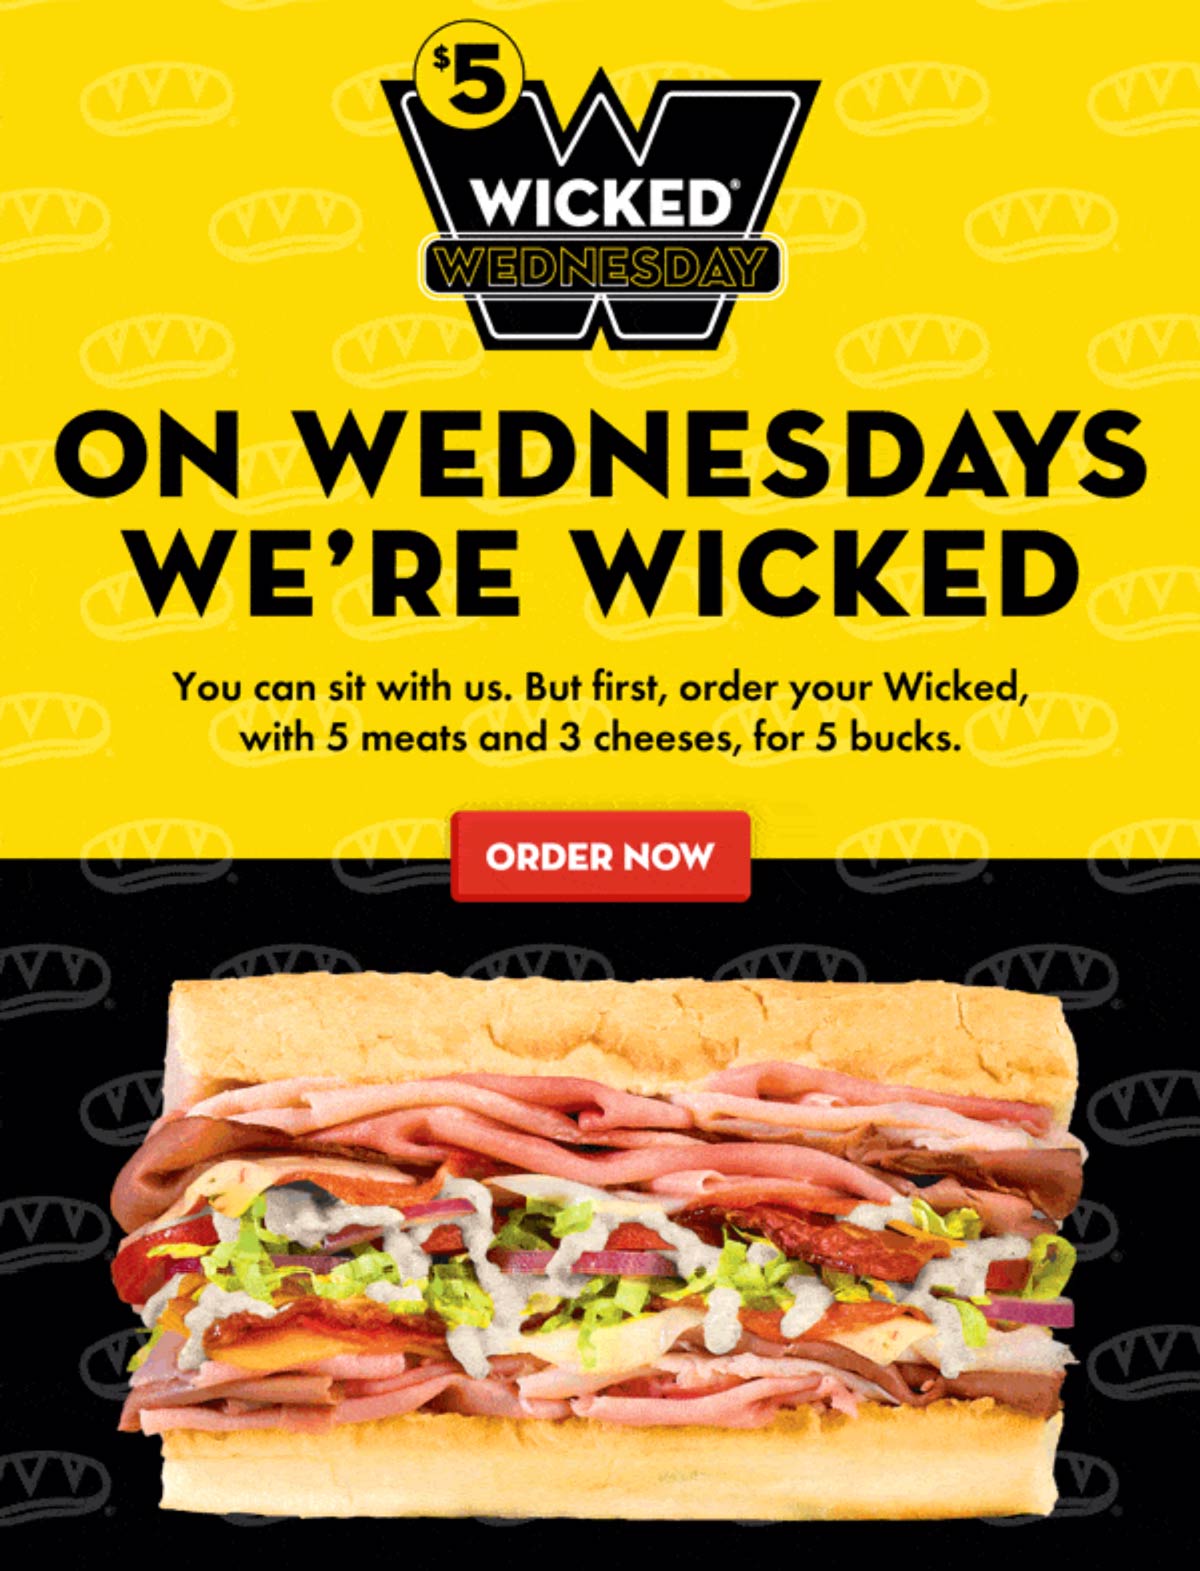 Which Wich restaurants Coupon  $5 5 meat 3 cheese sandwich today at Which Wich restaurants #whichwich 